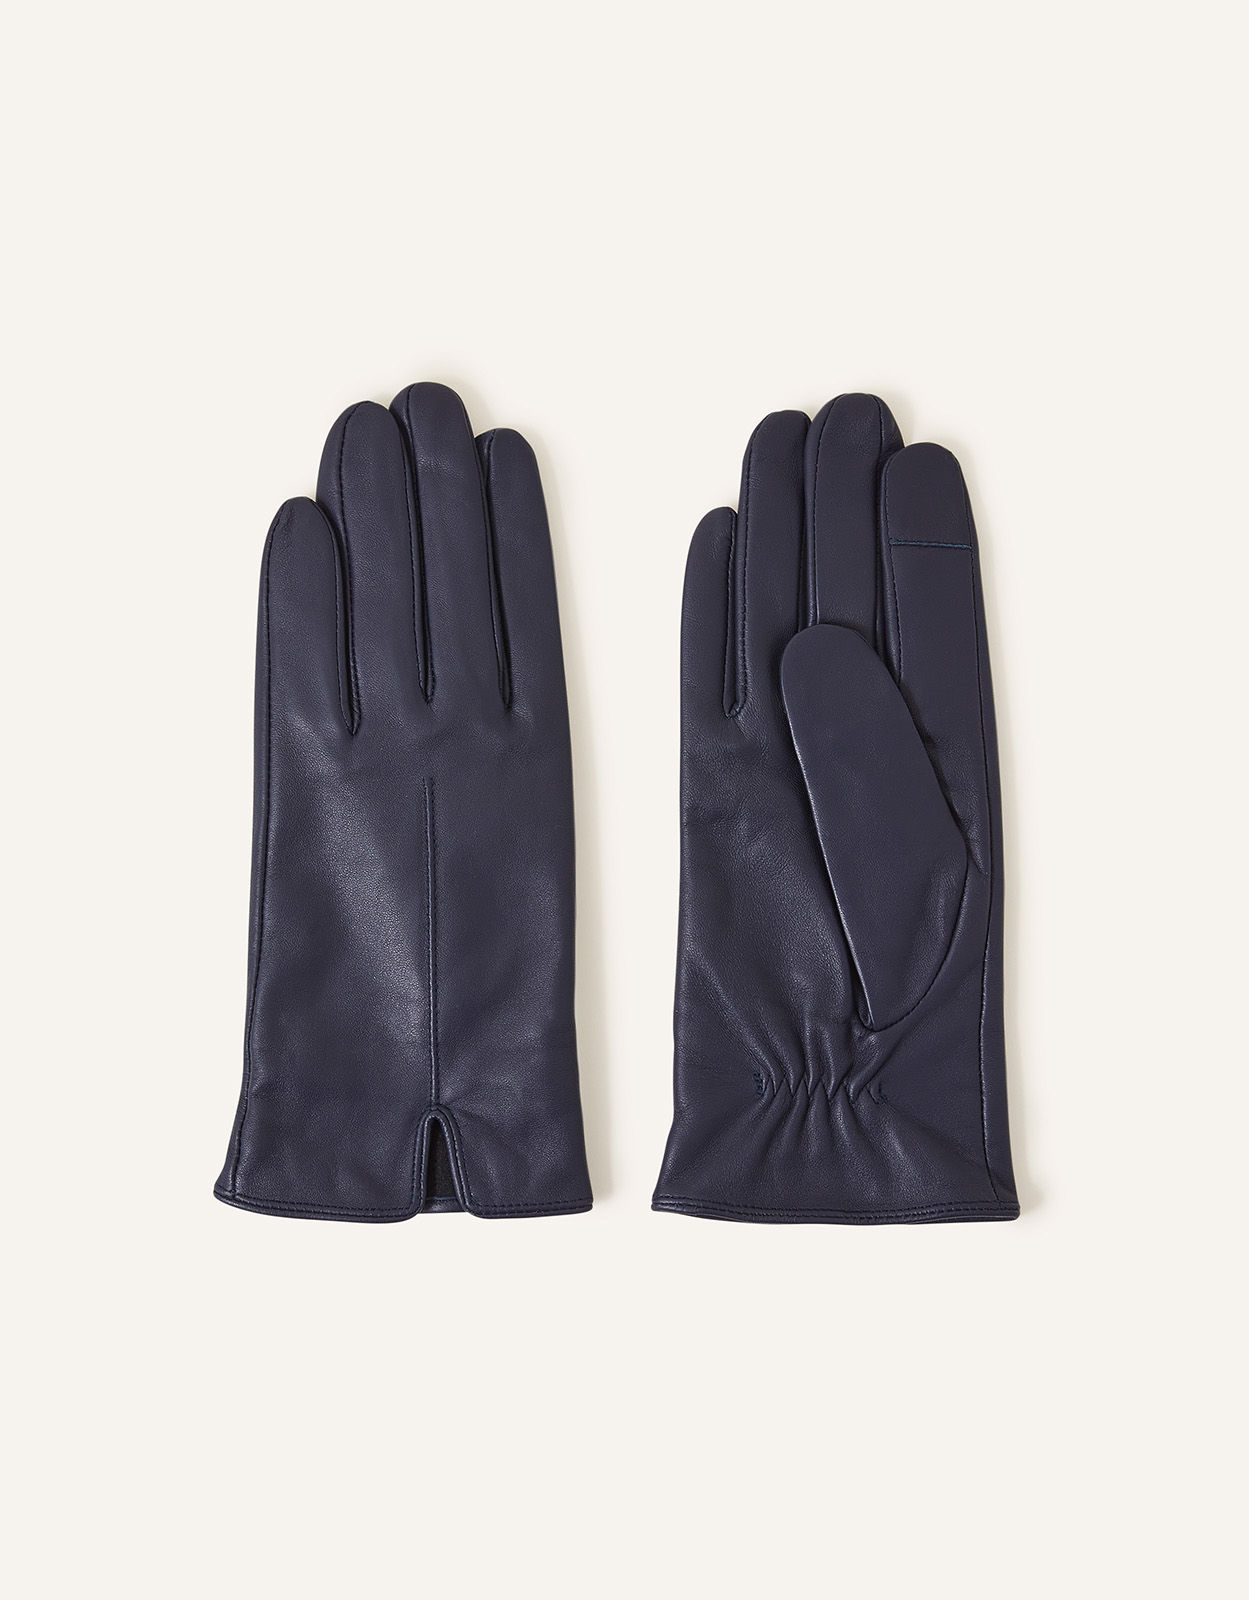 Accessorize Touchscreen Leather Gloves Blue